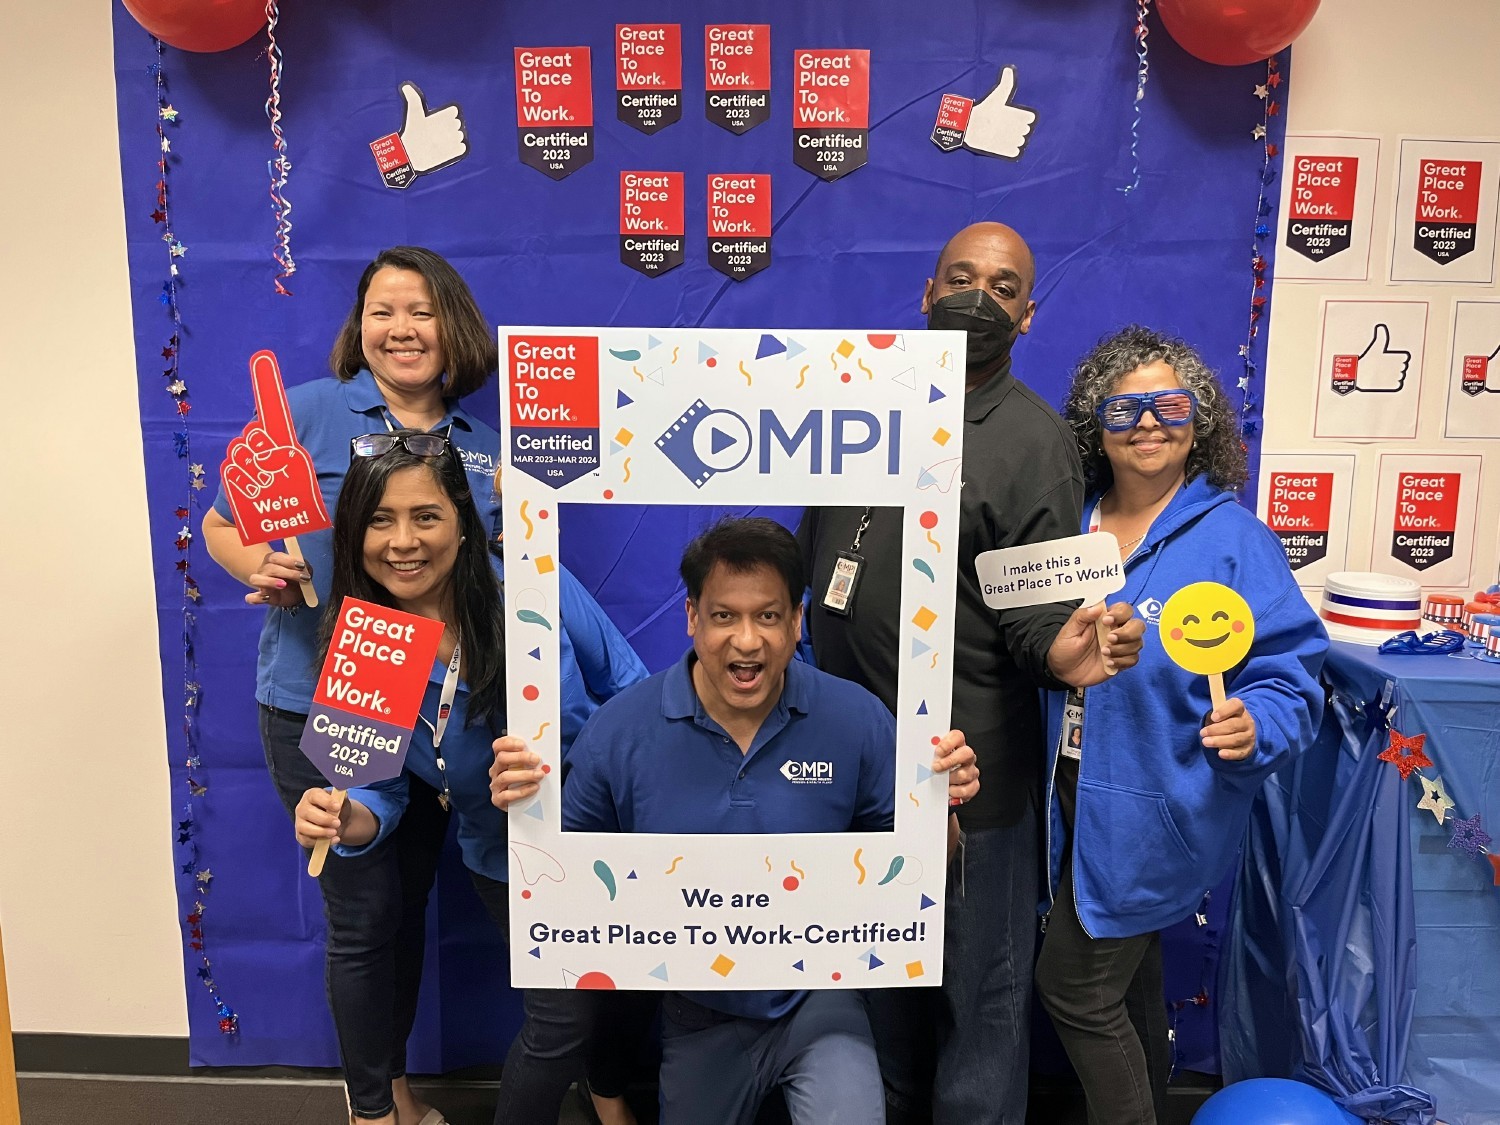 Celebrating our GPTW certification on Certification Nation Day!